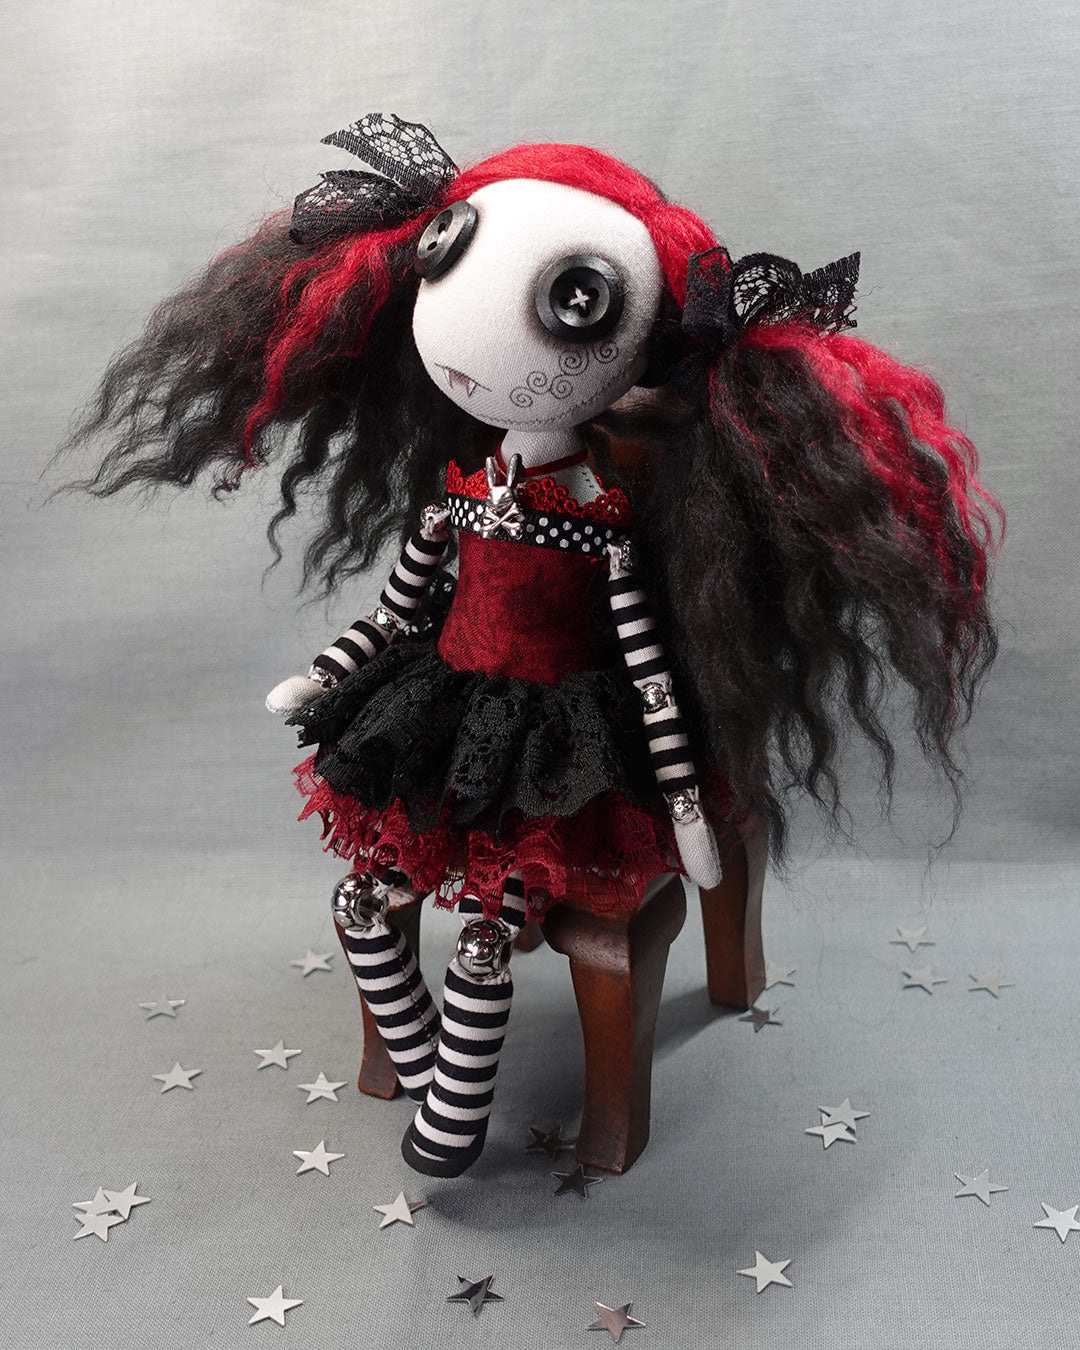 a button eyed cloth vampire doll in black and dark red